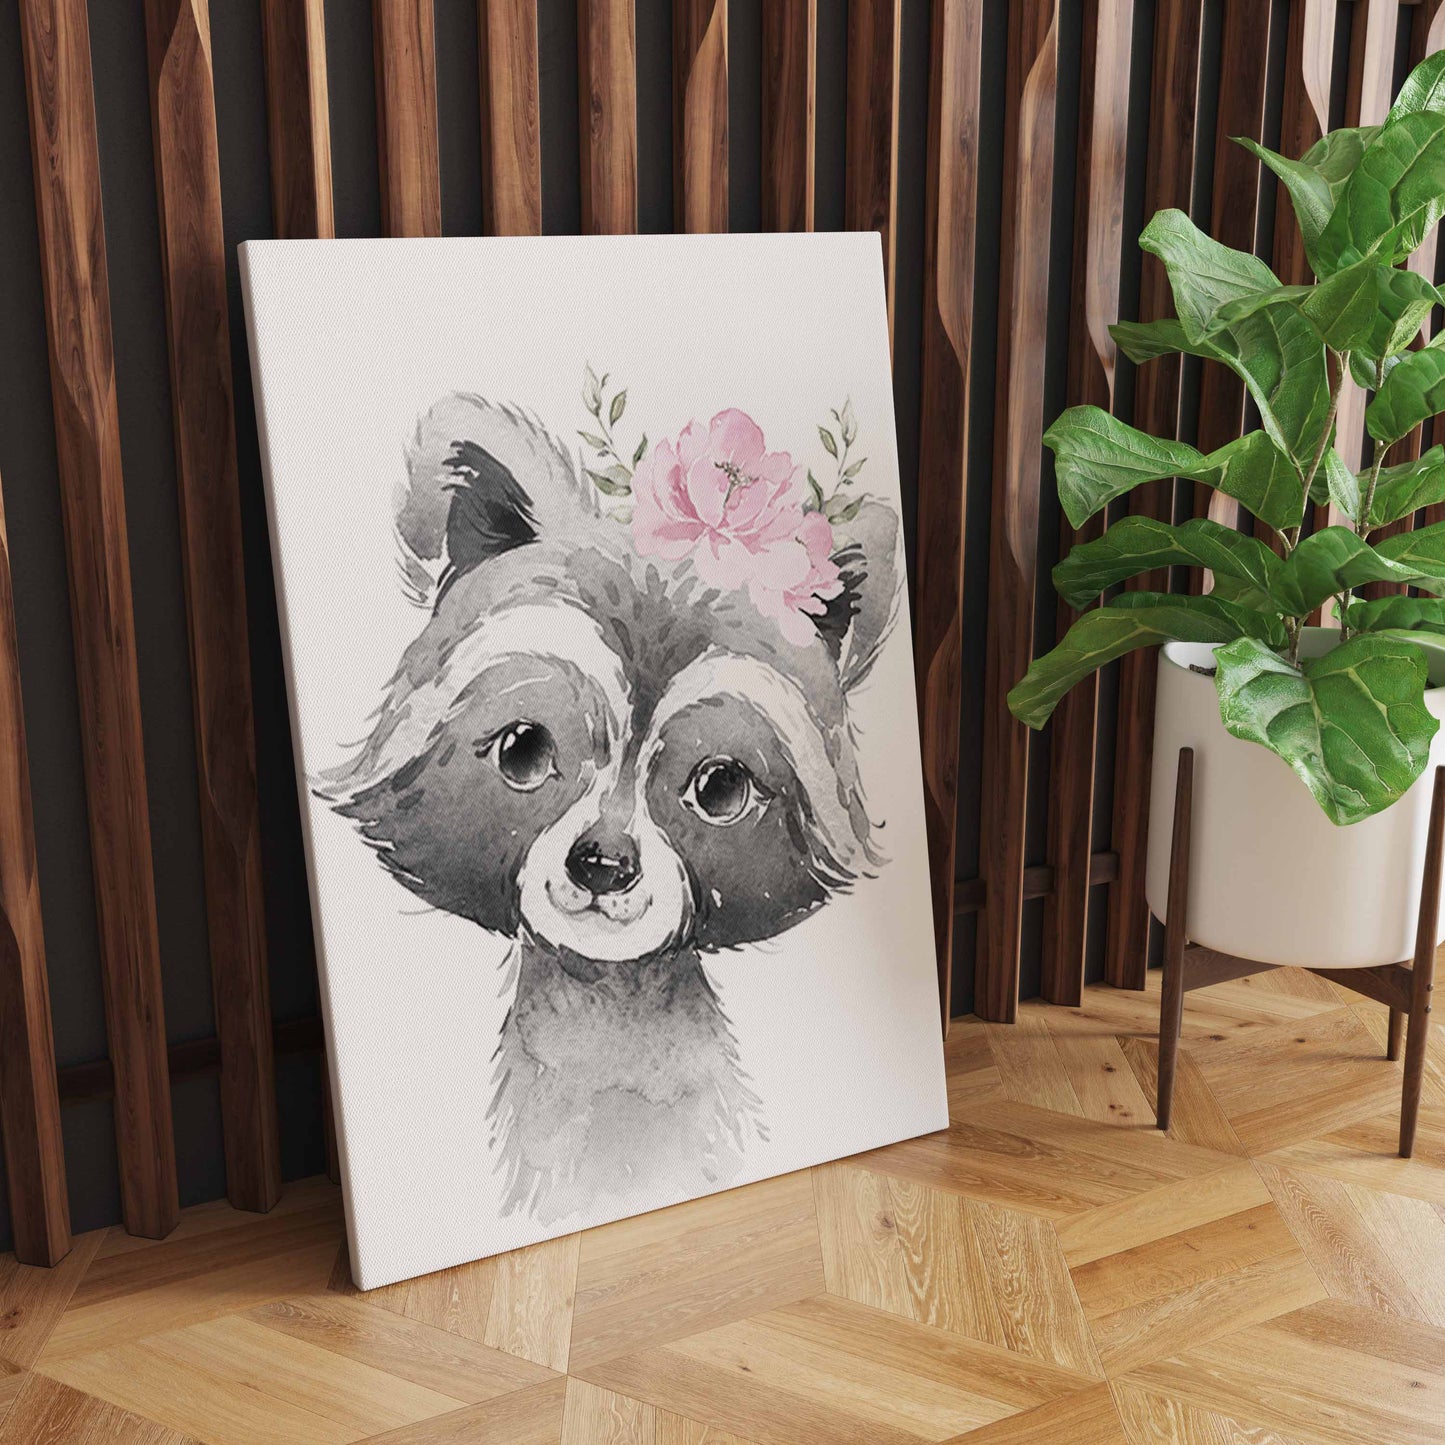 Delightful Cute Animal Poster Decoration: Vibrant, Personalized Wall Art for Kids' Rooms and Nursery Decor S04E12